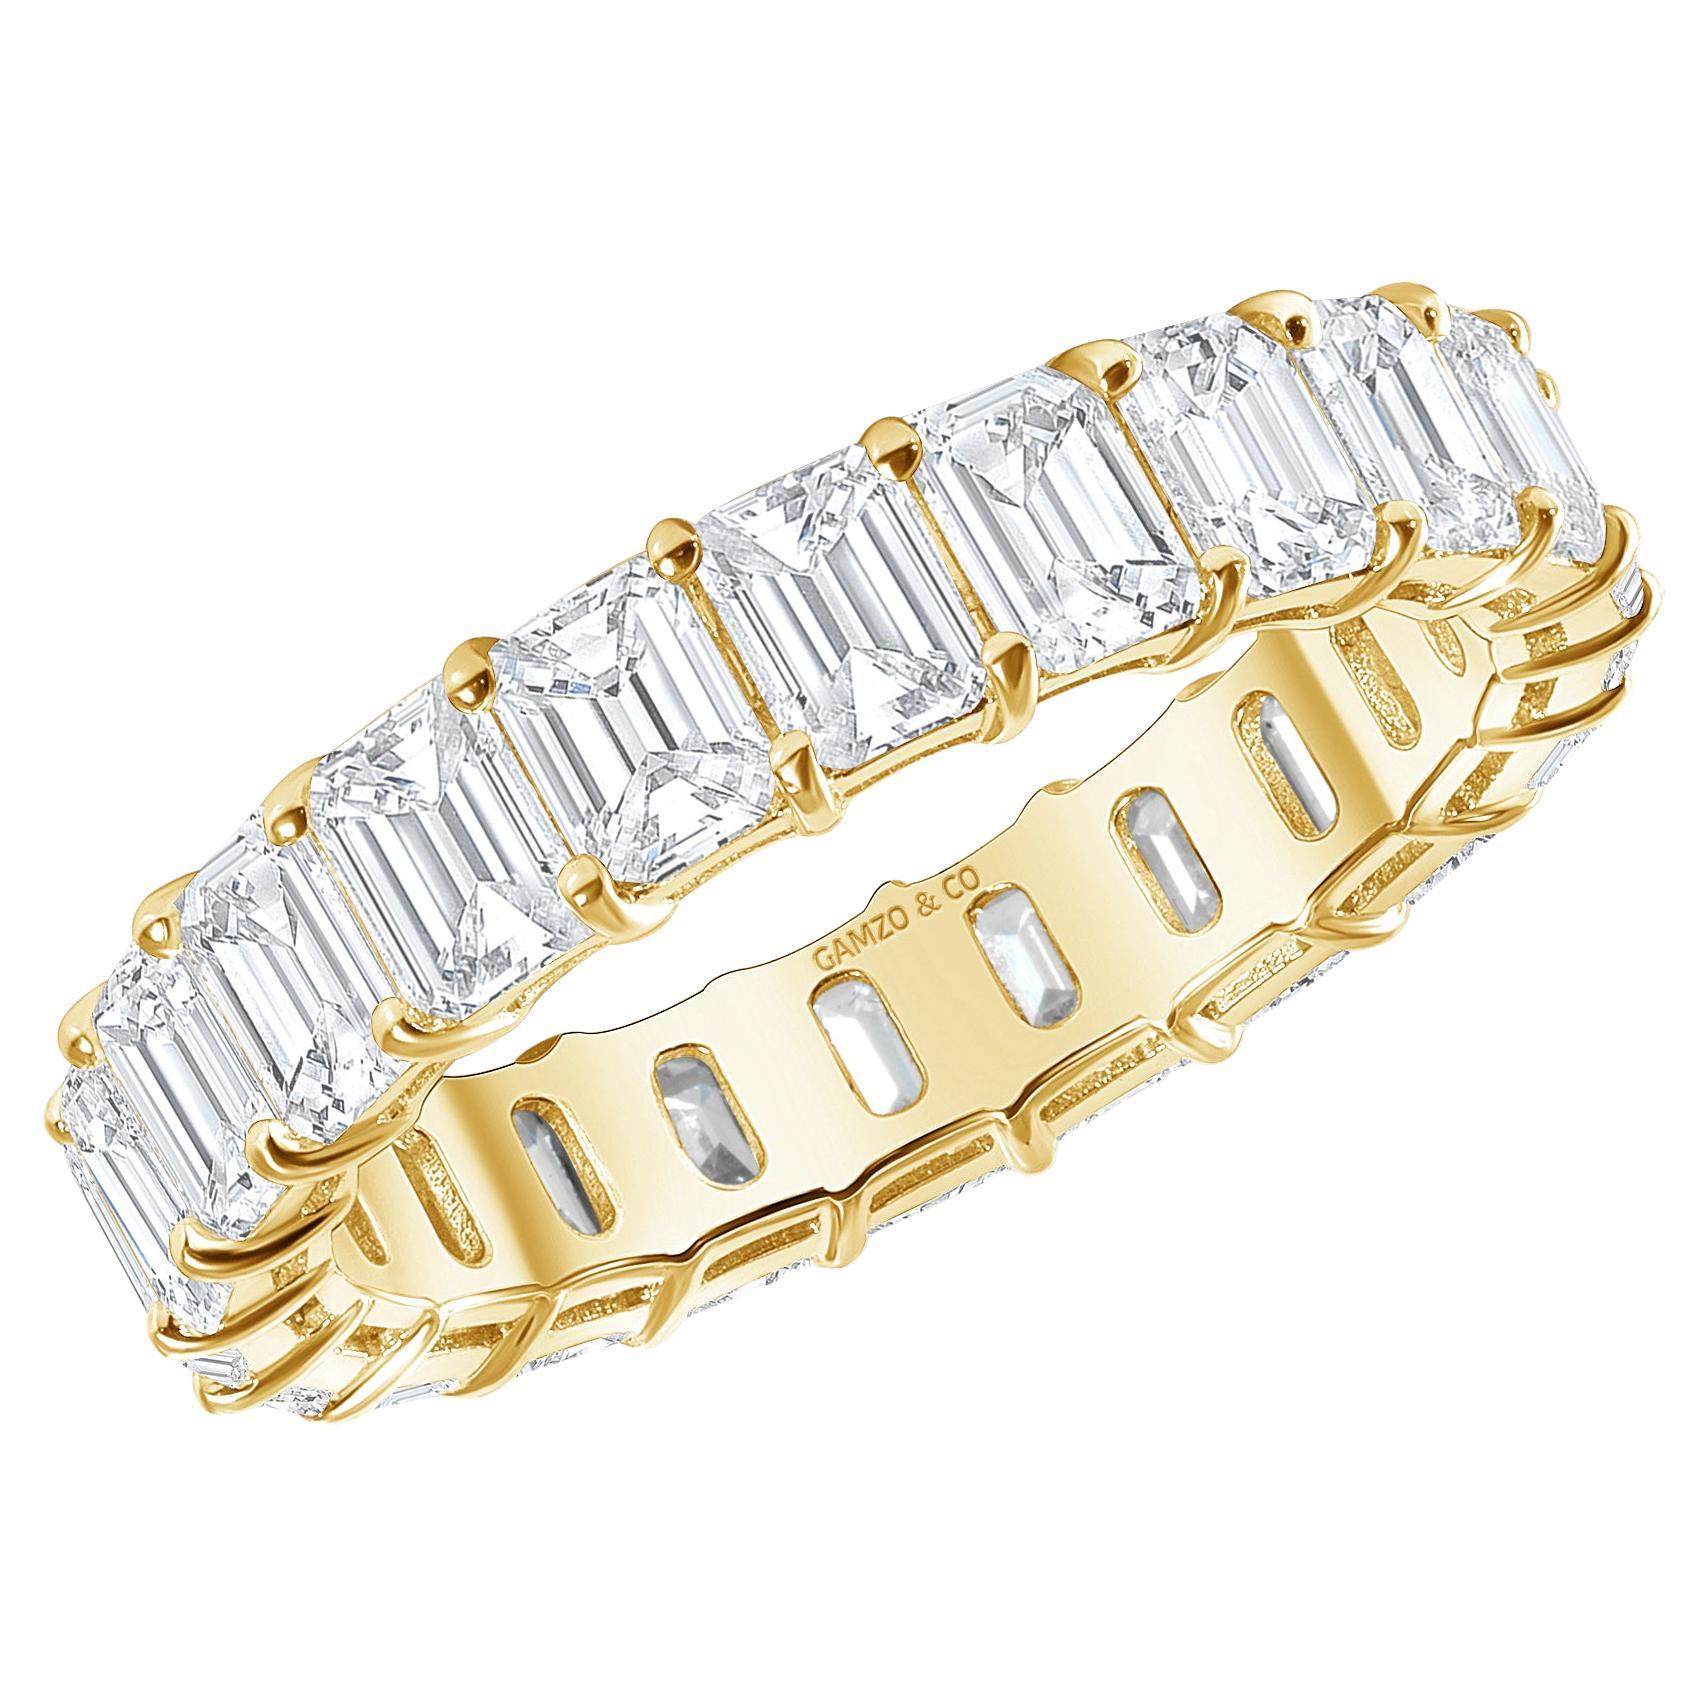 For Sale:  18k Yellow Gold 3 Carat Emerald Cut Natural Diamond Eternity Ring